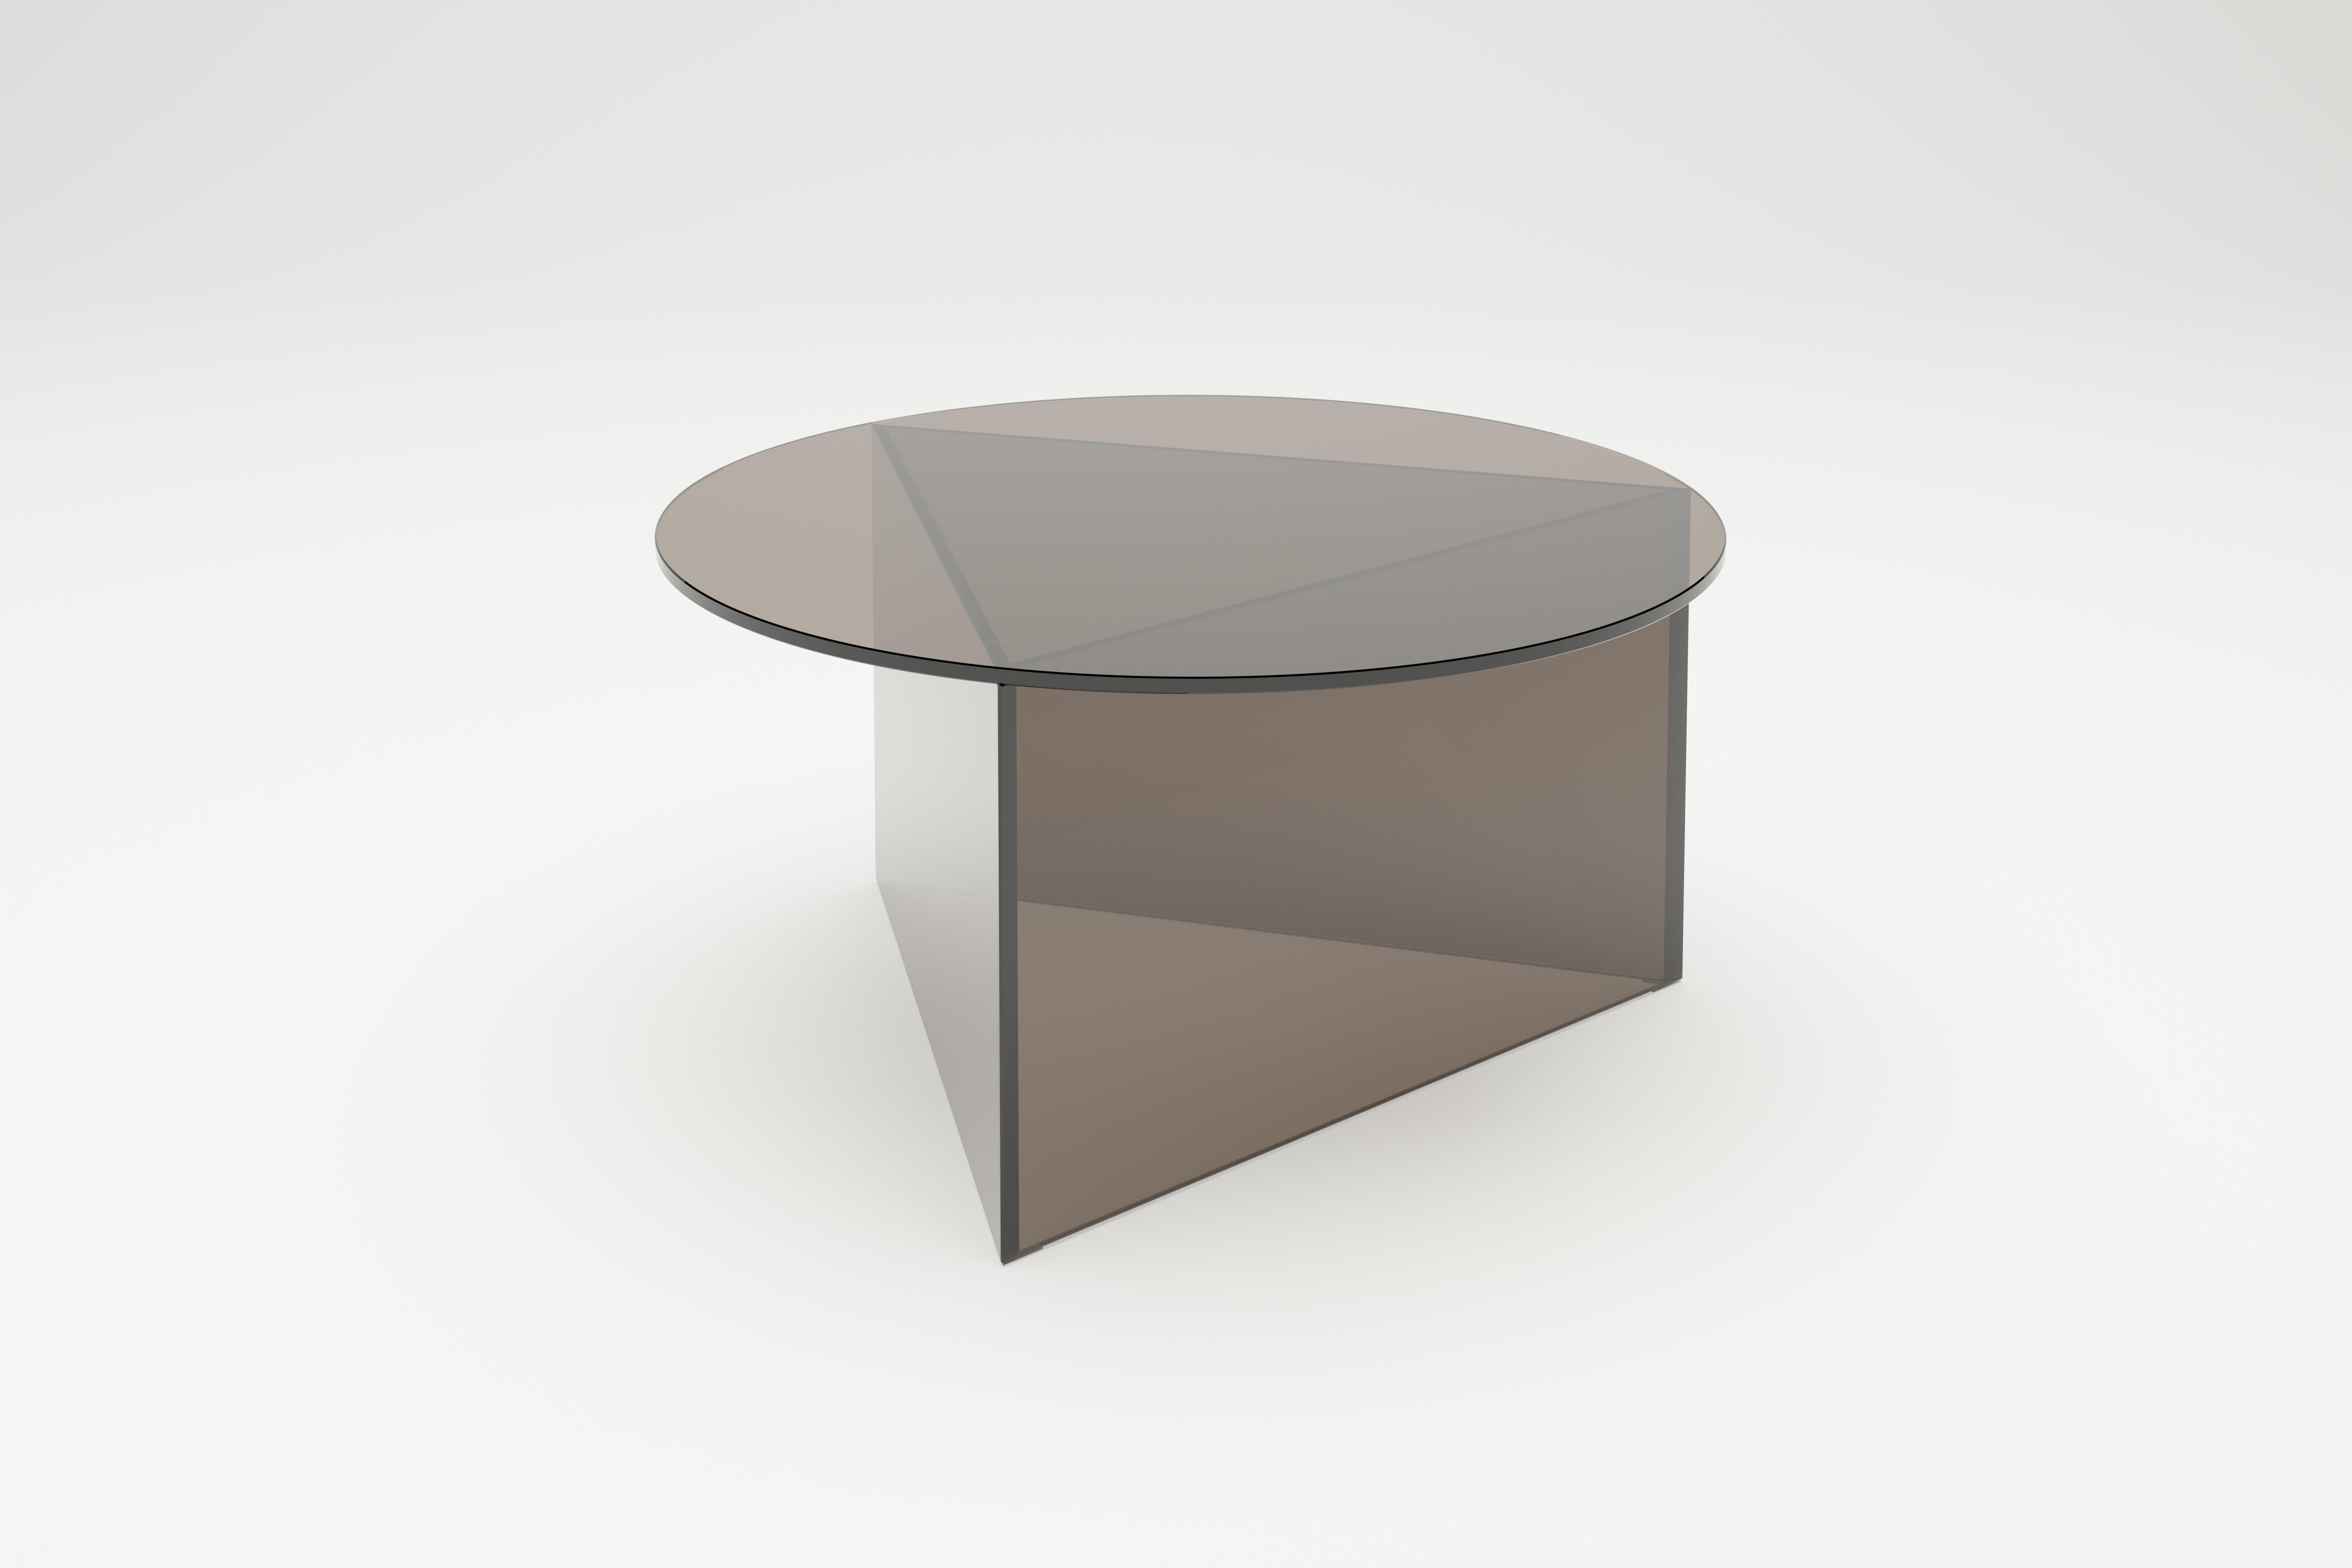 Clear glass prisma circle 80 coffe table by Sebastian Scherer
Dimensions: D 80x H 40 cm
Materials: solid colored glass.
Weight: 32.6 kg.
Also available: glass: clear white / clear green / clear blue / clear bronze / clear black / satin white /